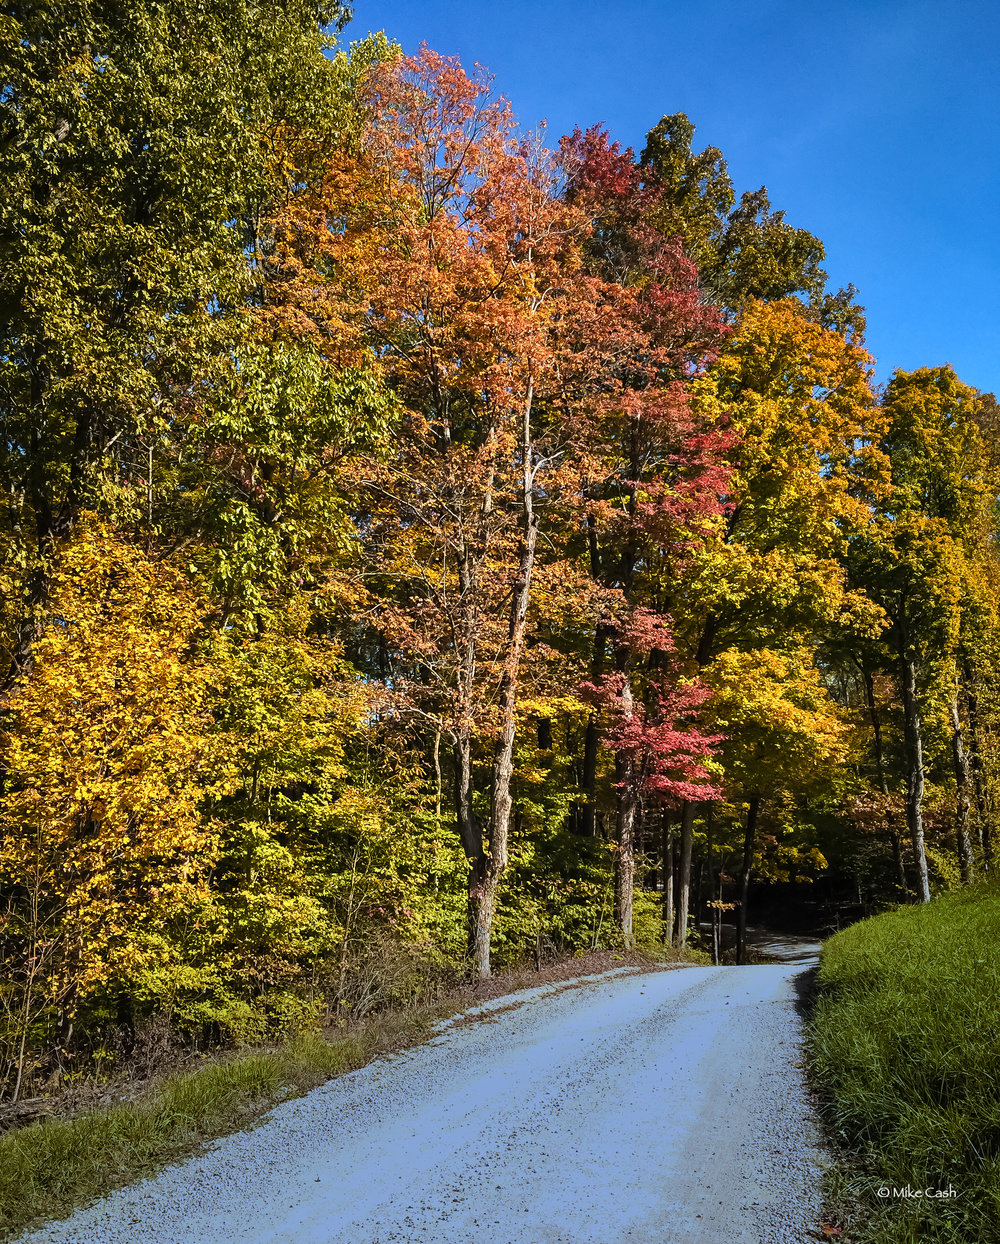  Color along the road in Owen-Putnam State Forest. 